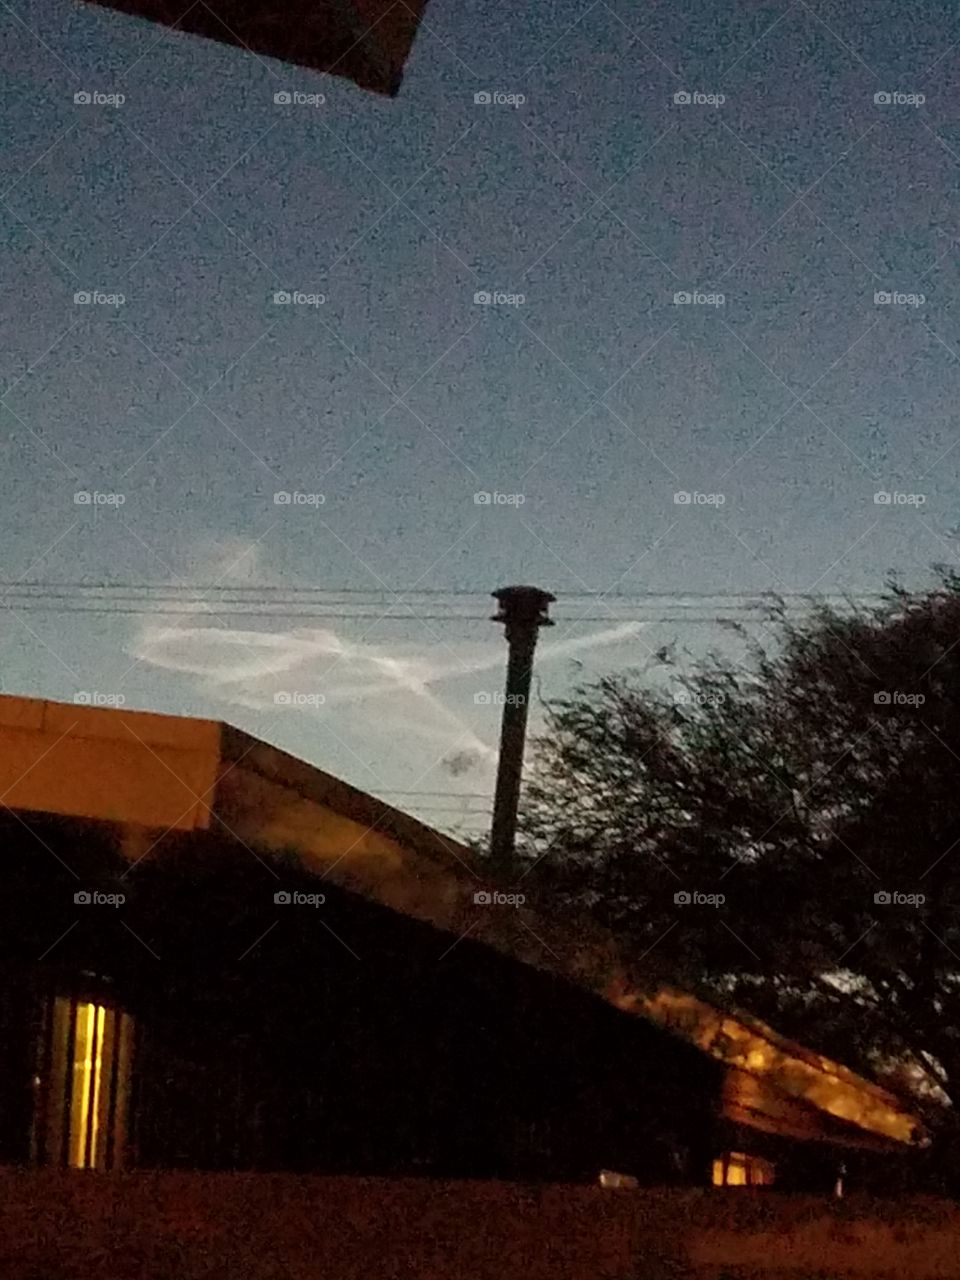 something weird in the sky